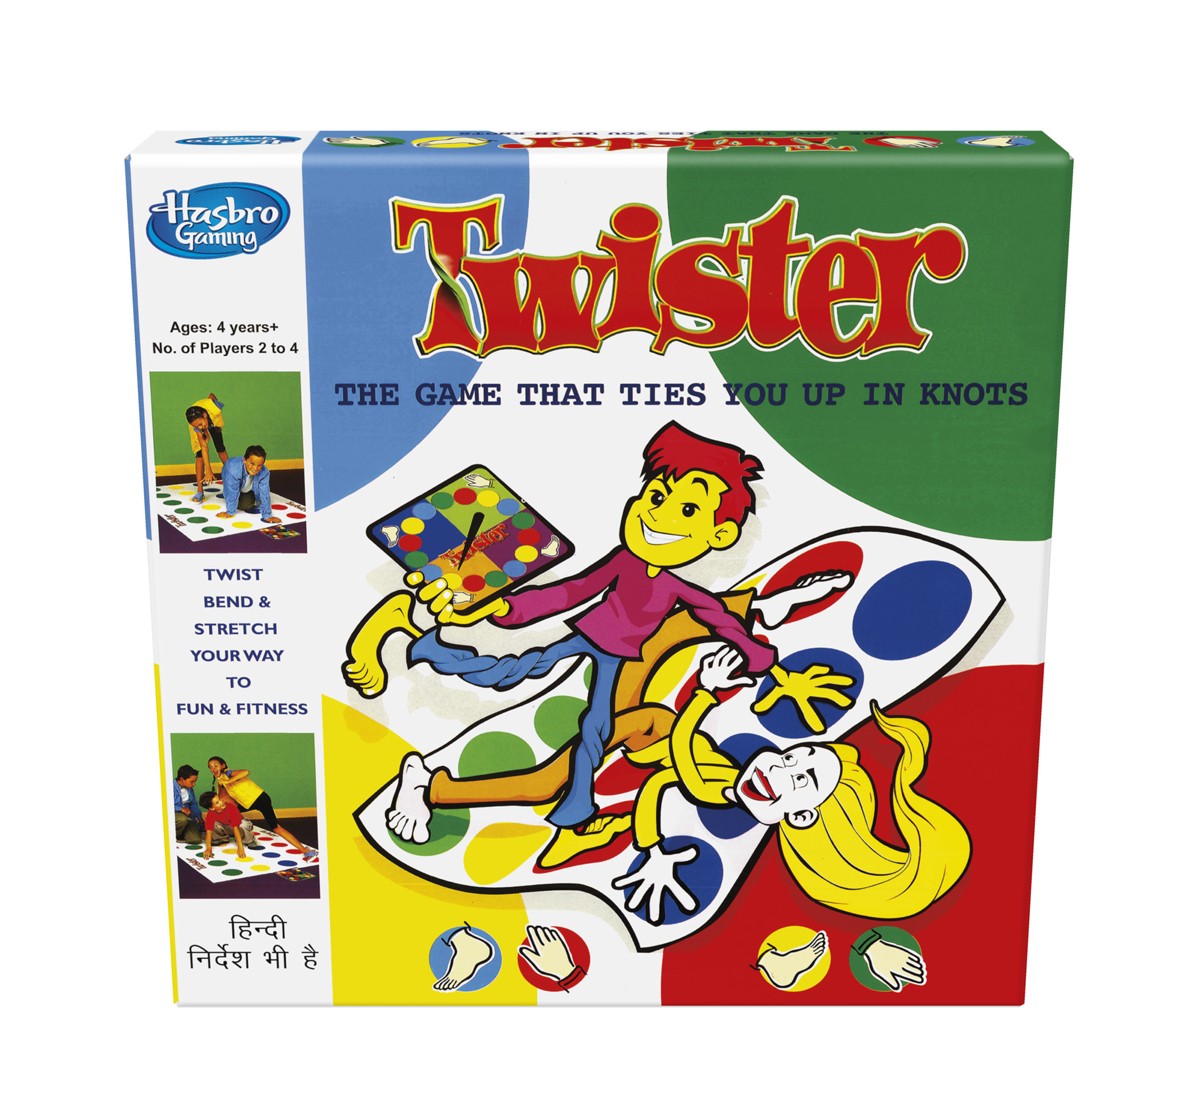 Hasbro Twister Party Game For Family and Friends for Kids 4Y+, Multicolour